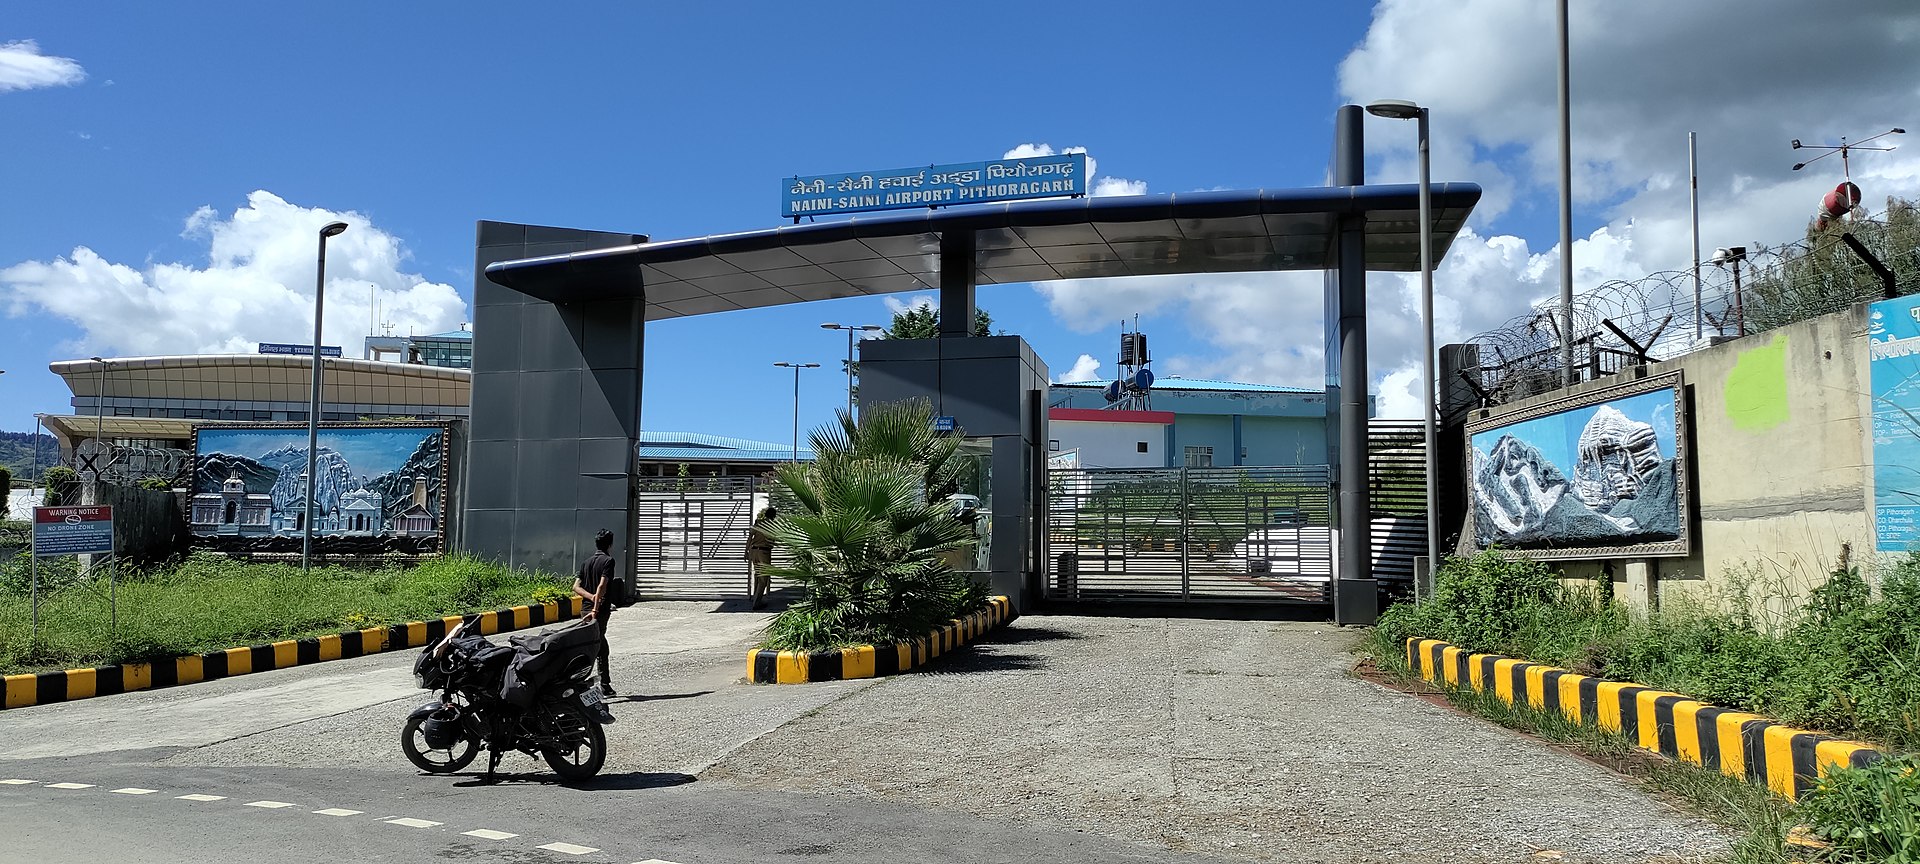 Pithoragarh Airport Handed Over To Air Force, Civil Flights Will Also Operate